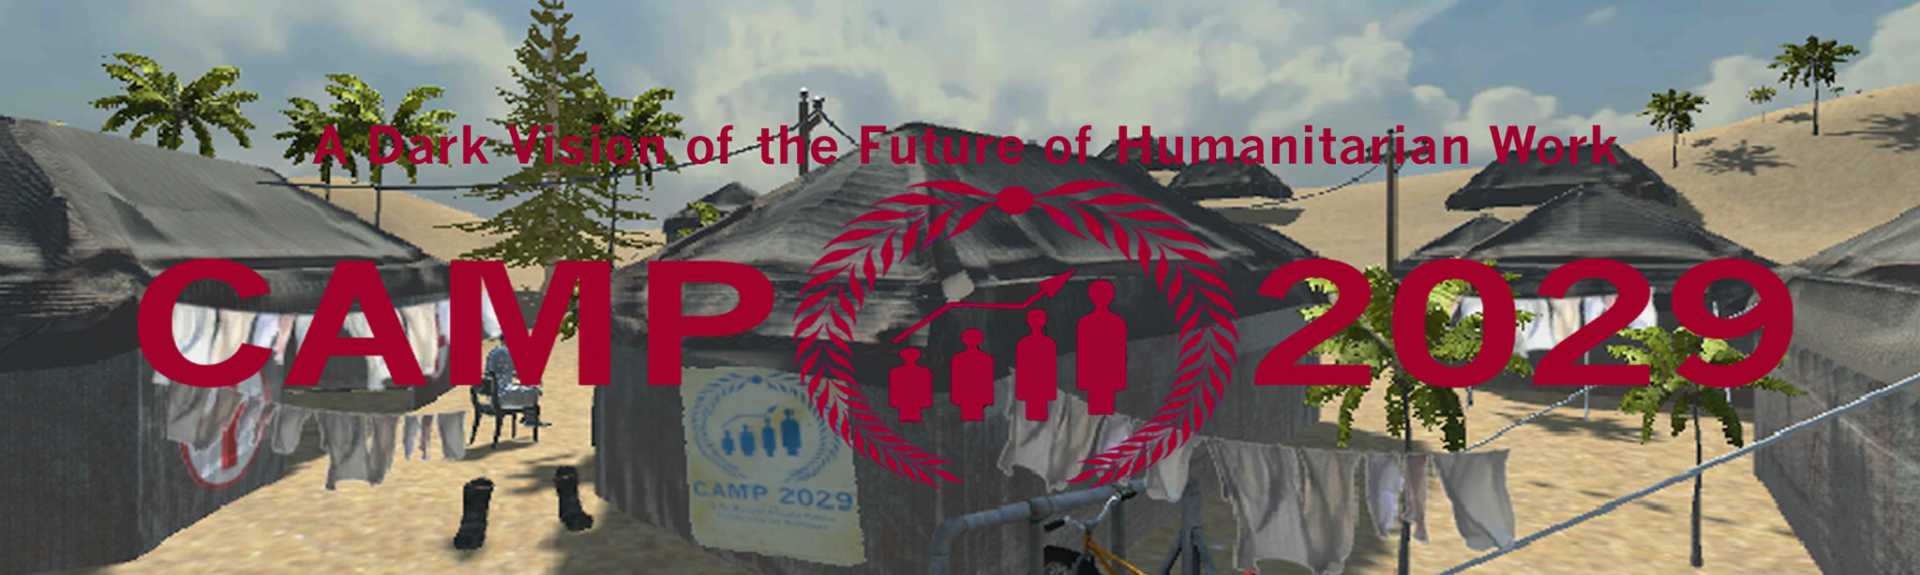 Camp 2029: A Dark Vision of the Future of Humanitarian Work